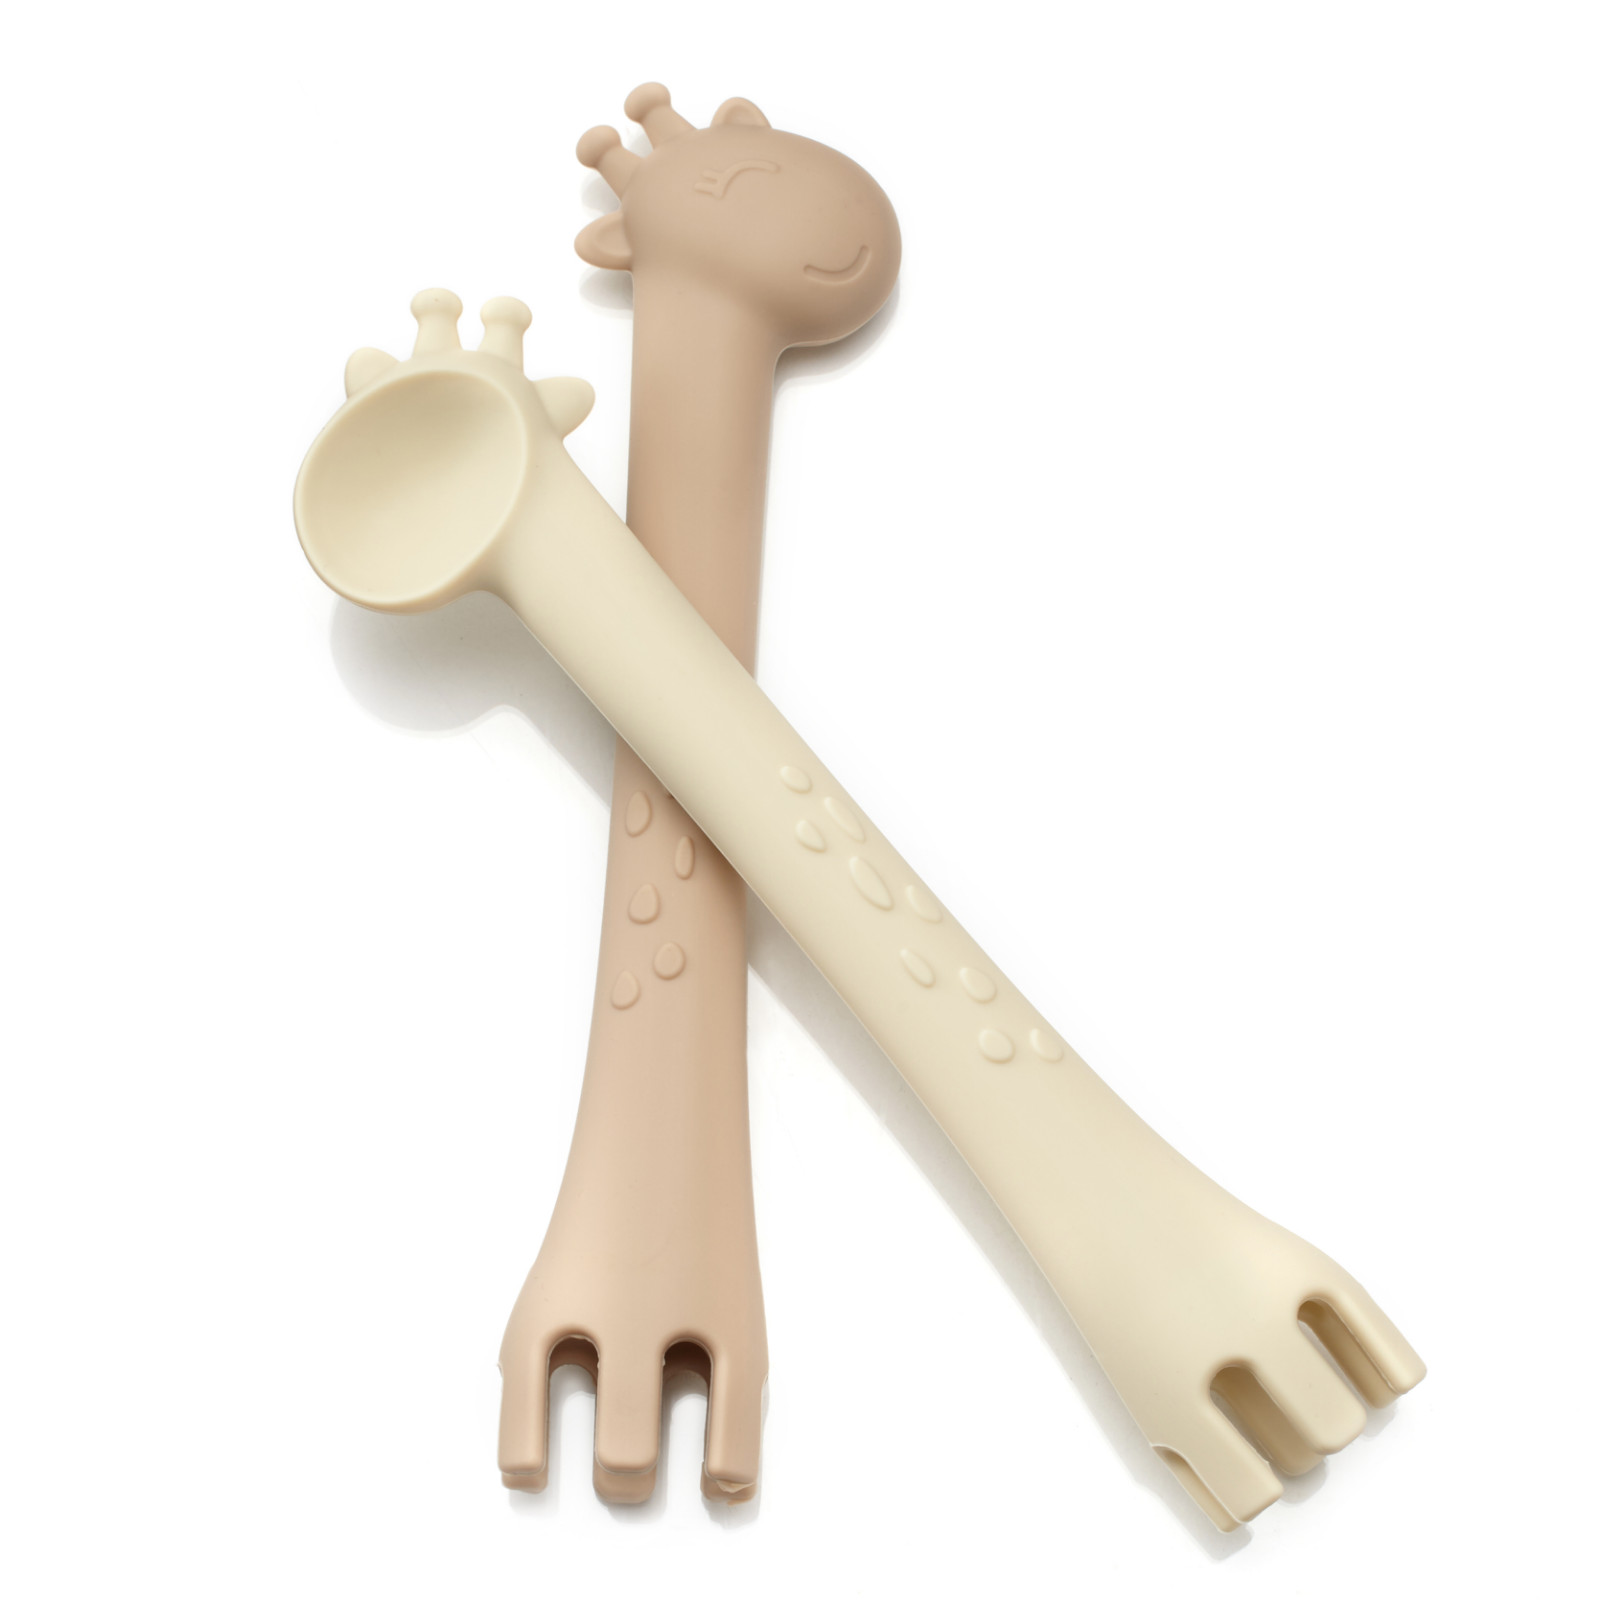 Personalized Spoon and Fork Set, Sweet Baby Giraffe